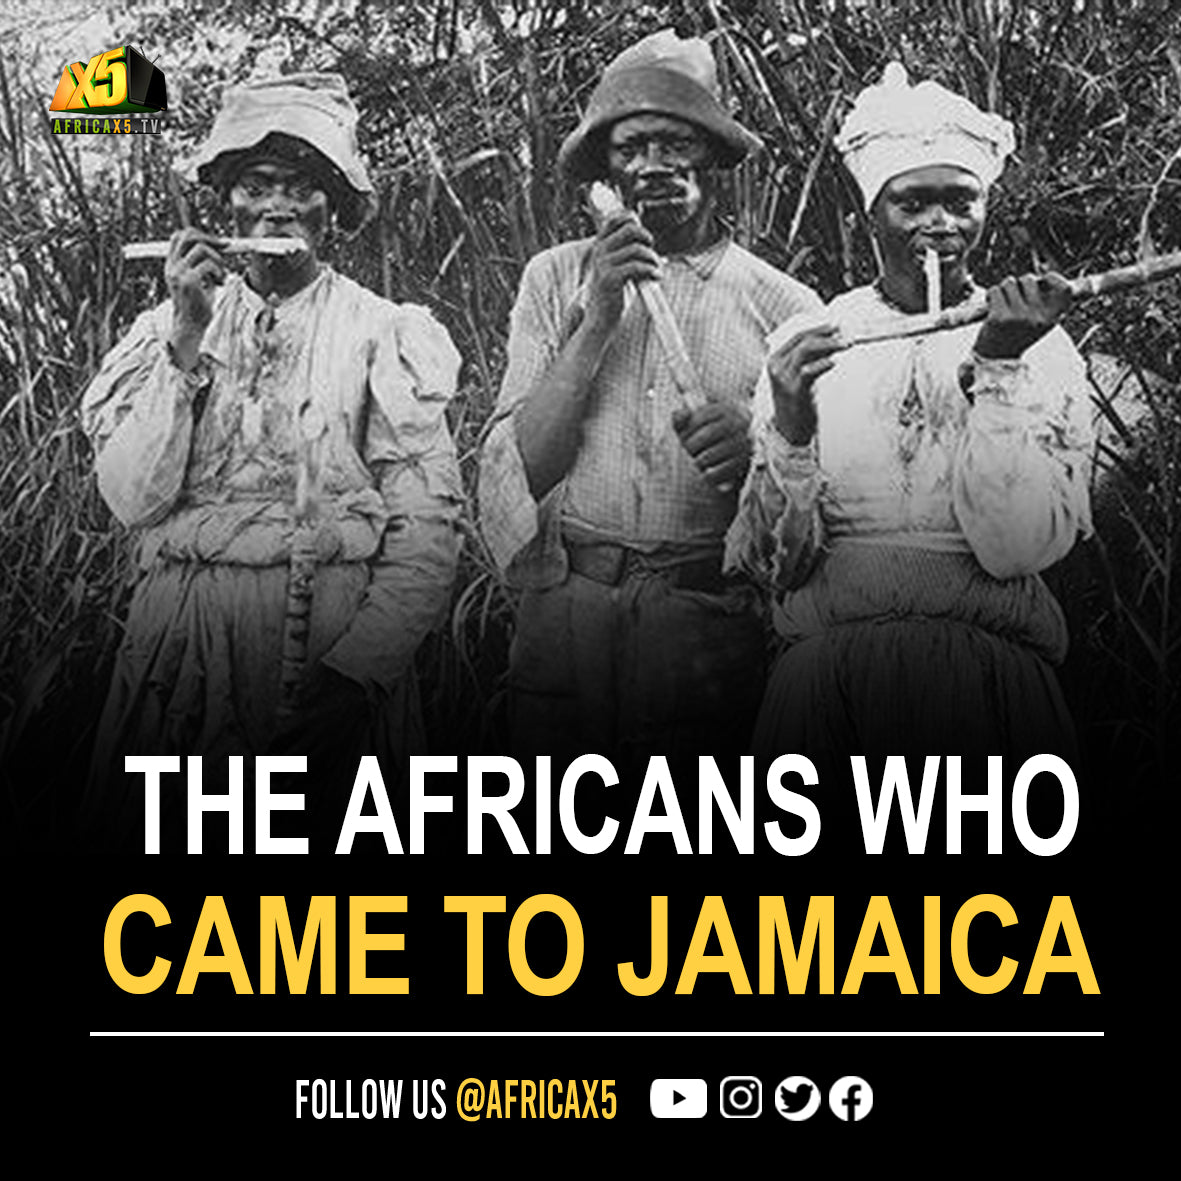 THE AFRICANS WHO CAME TO JAMAICA